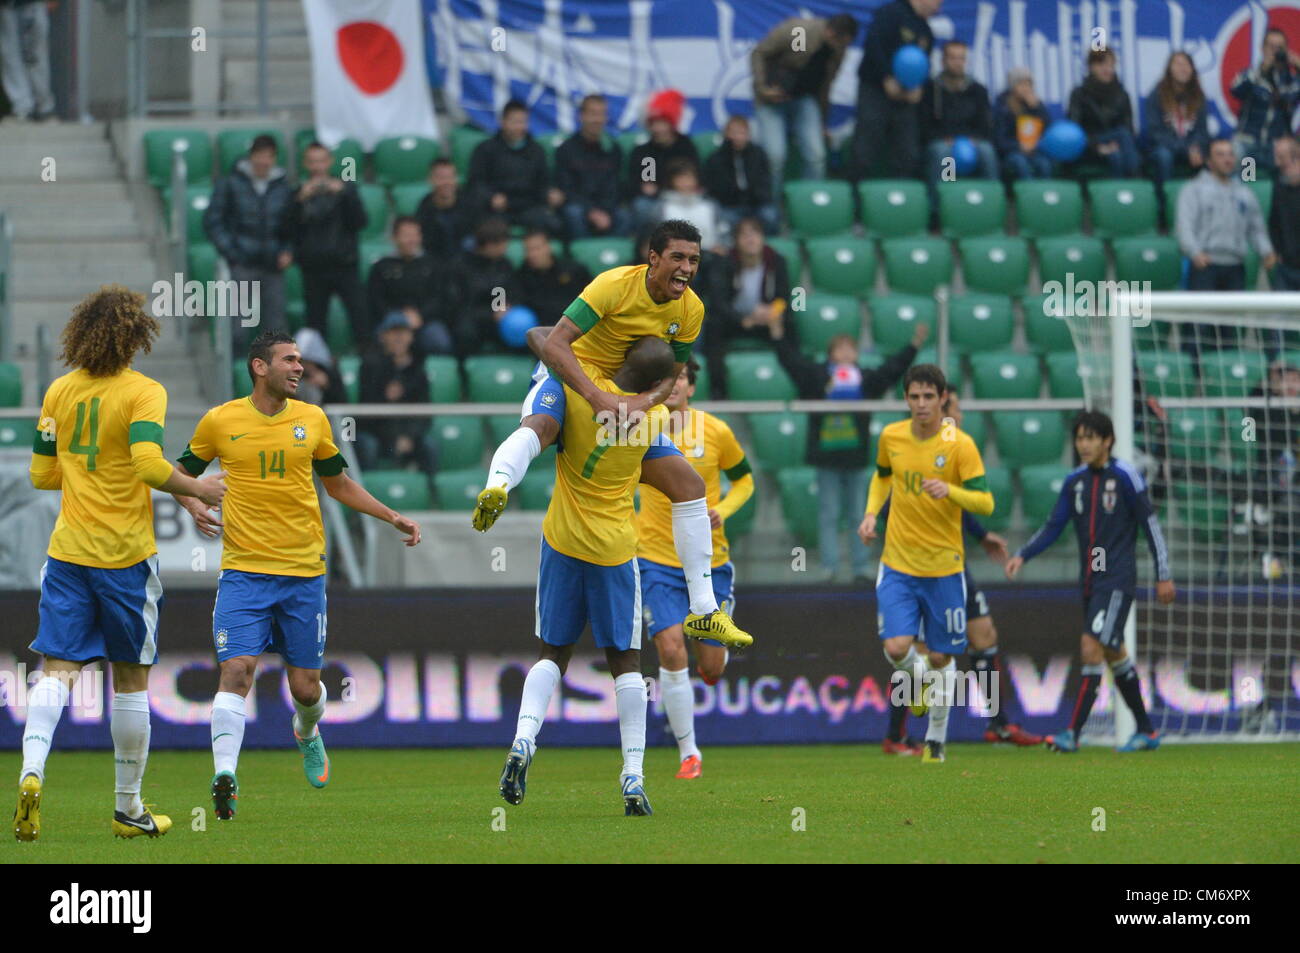 Paulinho (BRA), OCTOBER 16, 2012 - Football /Soccer : Paulinho (top) of Brazil celebrates with his teammates Ramires #7 after scoring the opening goal during the international friendly match between Japan 0-4 Brazil at Municipal Stadium in Wroclaw, Poland. (Photo by Jinten Sawada/AFLO) Stock Photo